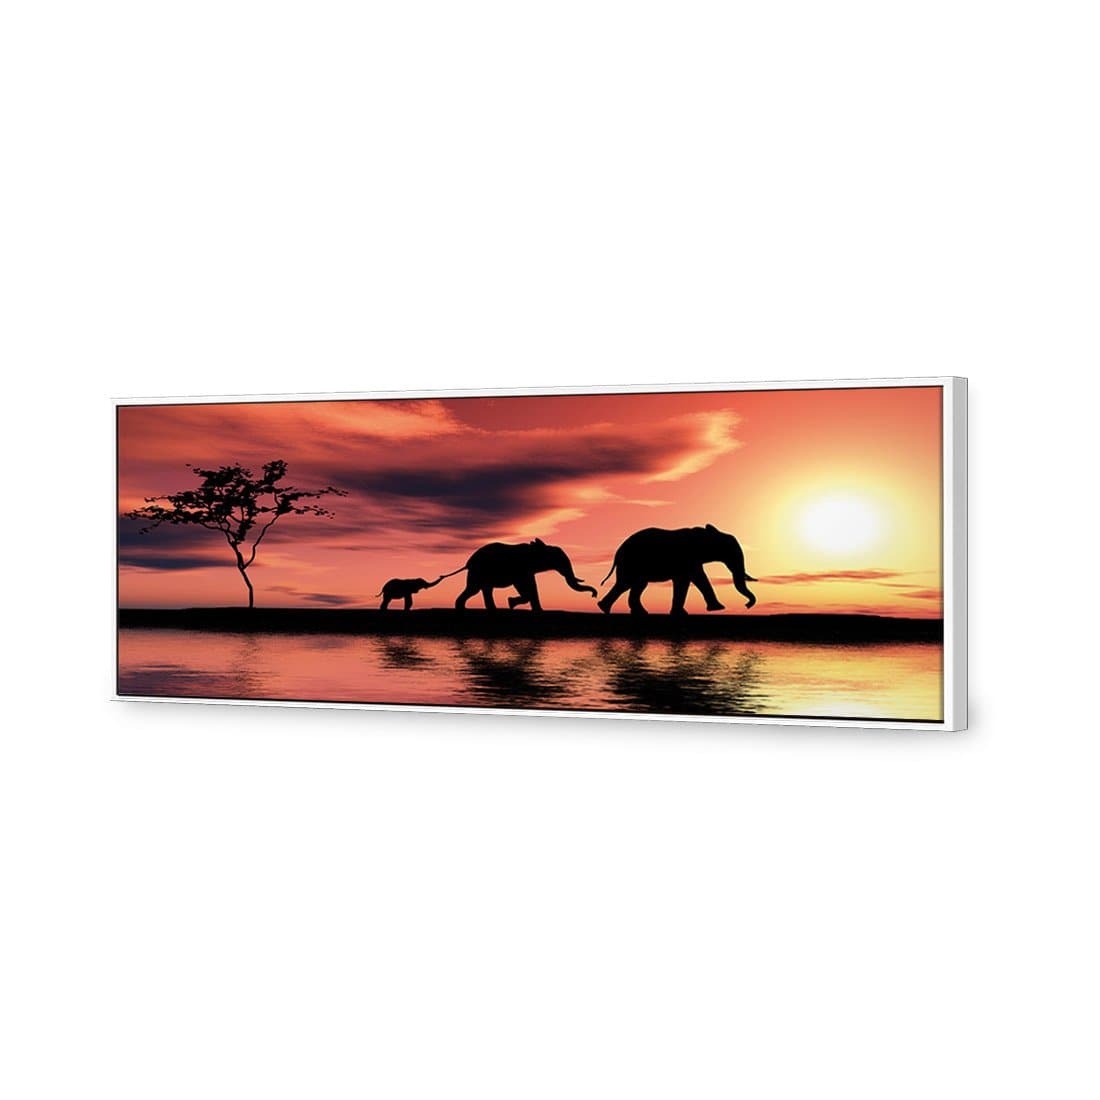 Family of Elephants at Sunset Canvas Art-Canvas-Wall Art Designs-60x20cm-Canvas - White Frame-Wall Art Designs